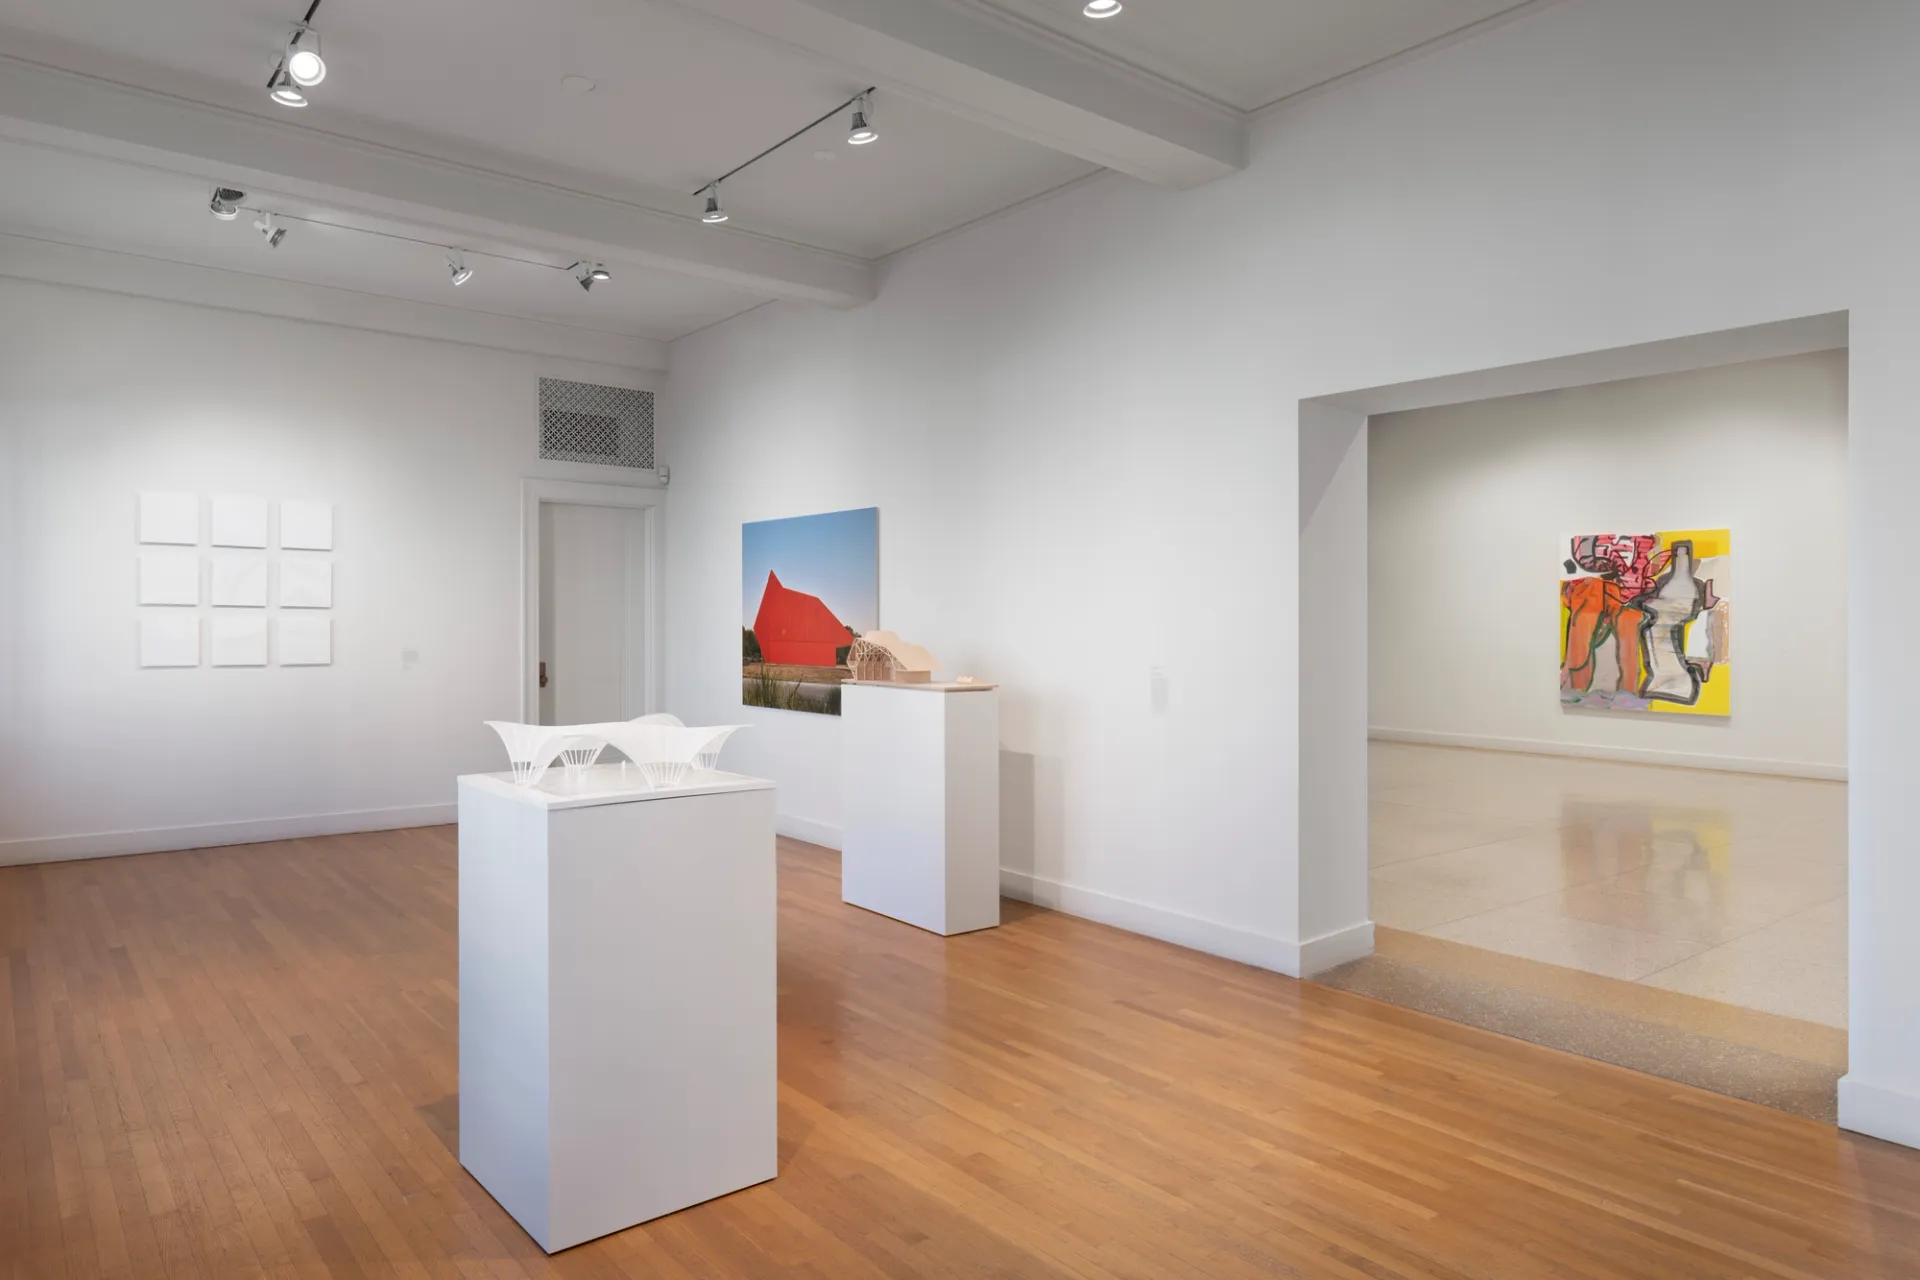 Architectural models sit on plinths in the center of a room and against a wall. To the left, art in a series of colorless squares comprise a single artwork. Against the adjacent wall lies a colorful artwork. To the right, and through an entryway, a single painting adorns a wall